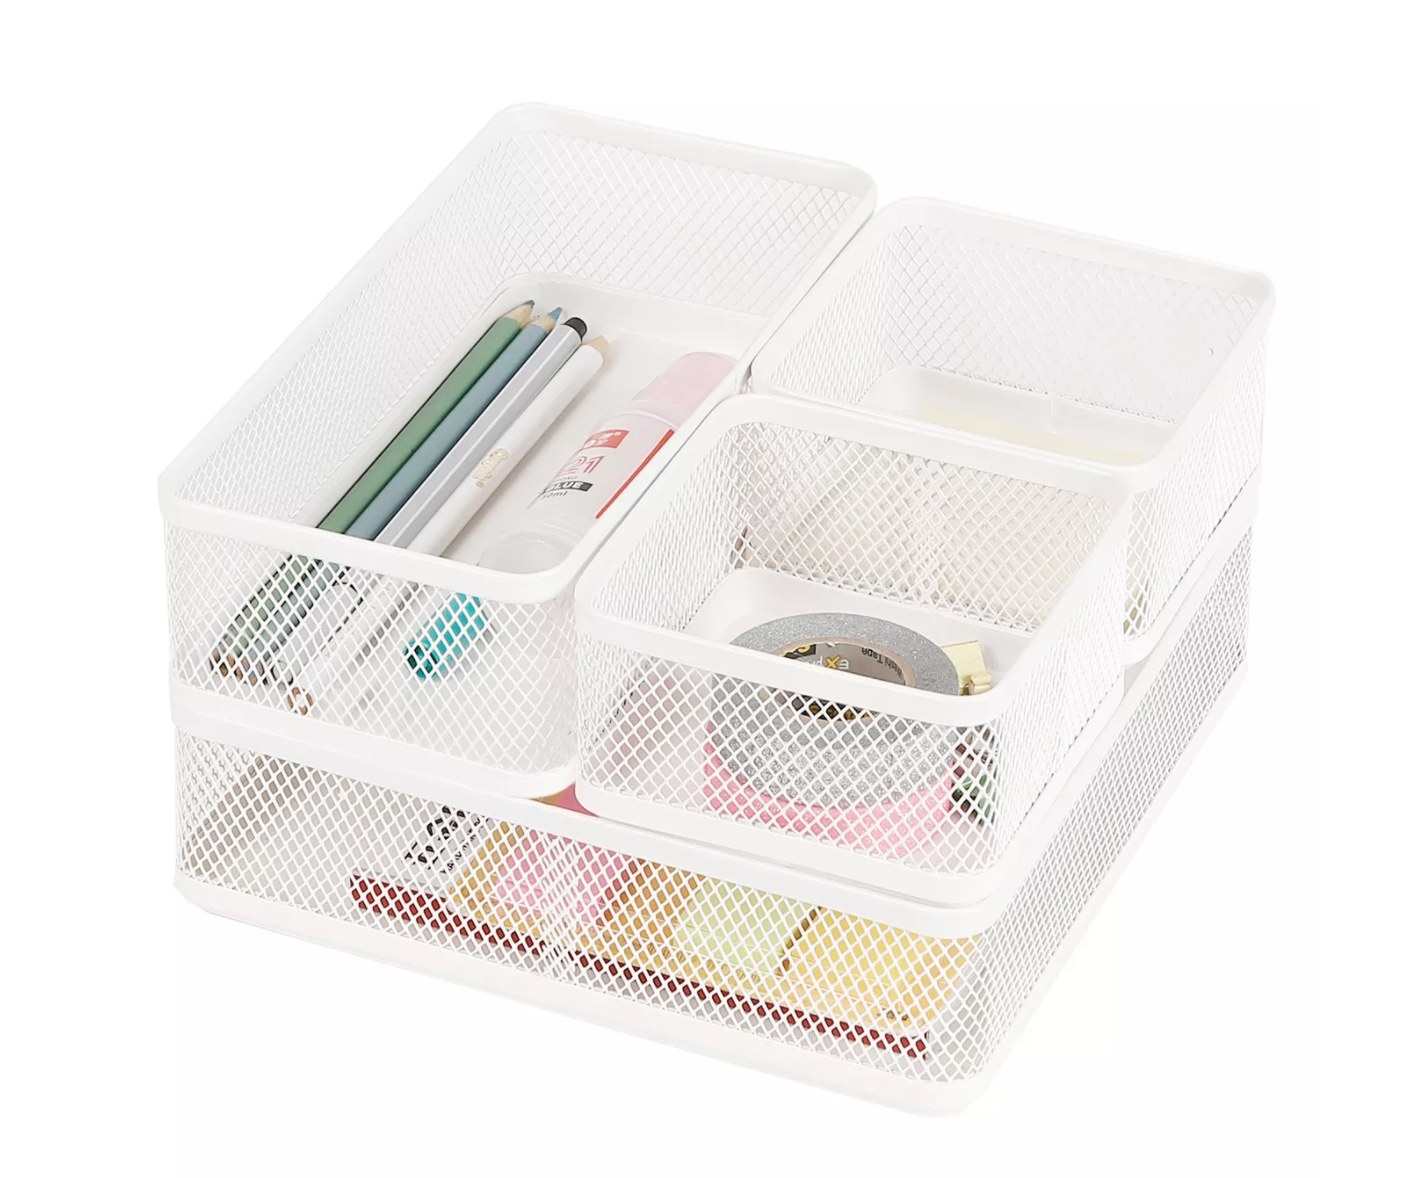 The white mesh organizer with the different parts full of office supplies 